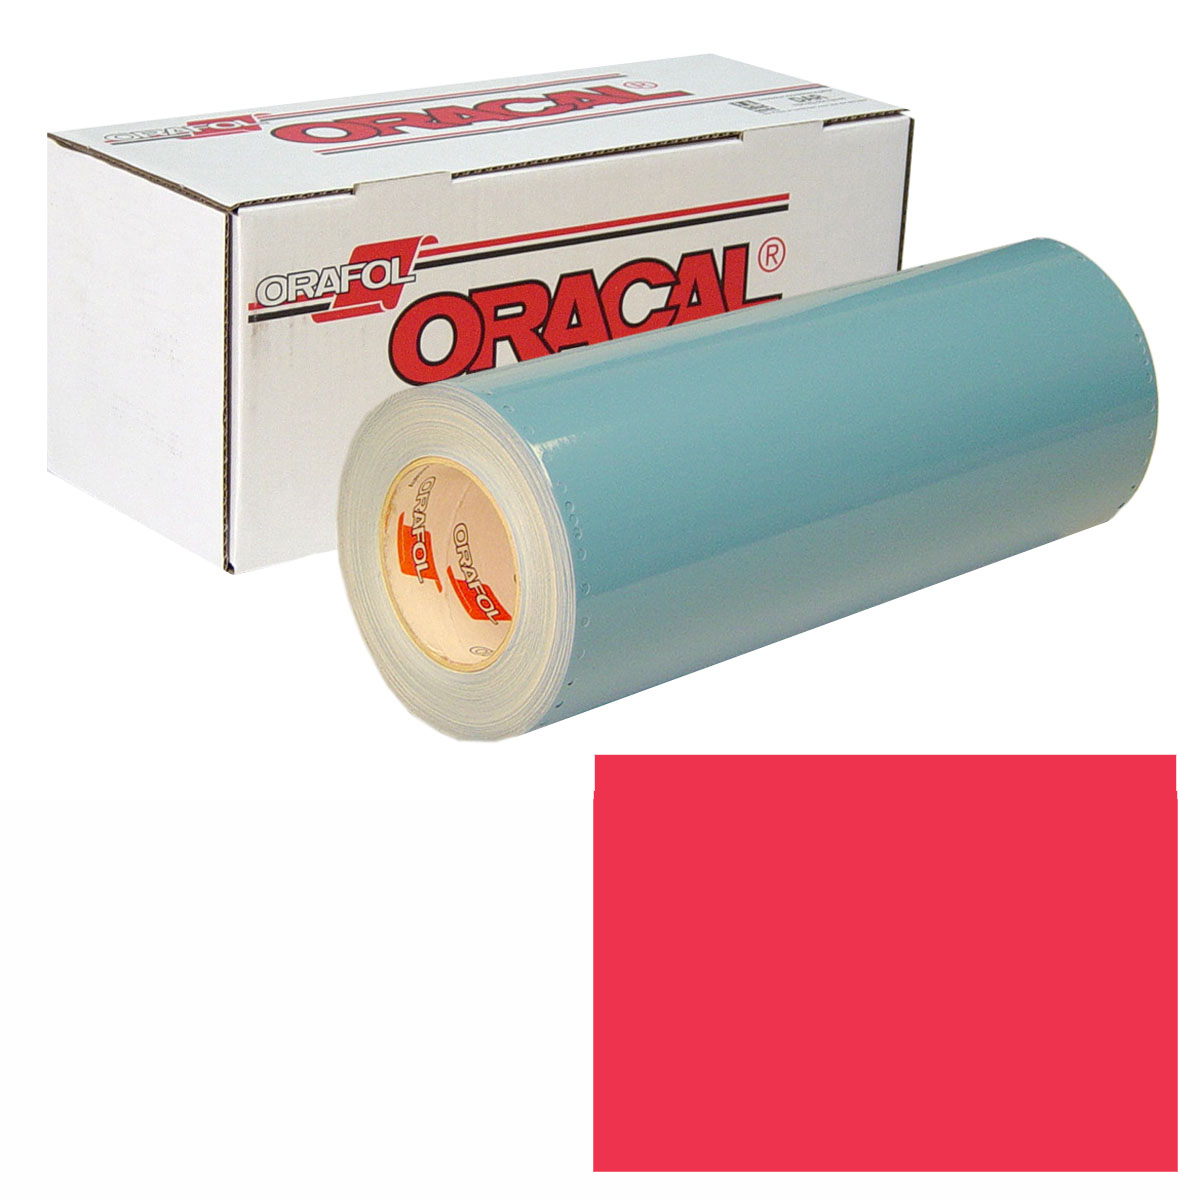 ORACAL 751 15in X 50yd 324 Blood Red